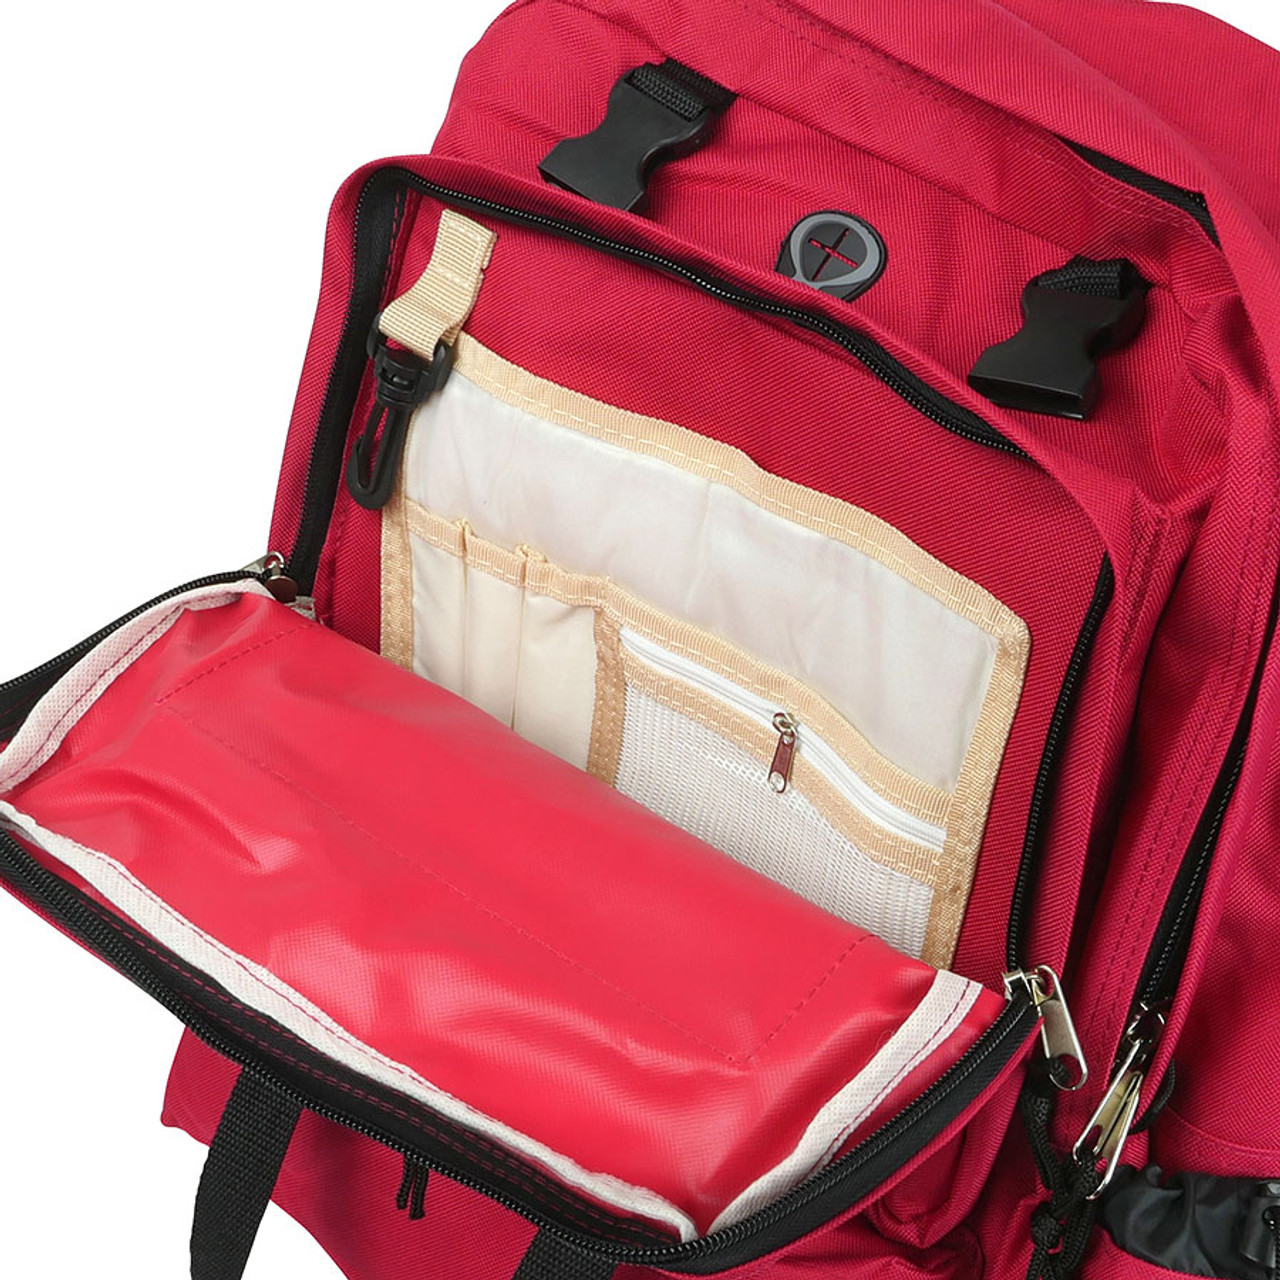 Deluxe Reponder Red Backpack and EMT - Containers Emergency Backpacks First Survival Bags, Gear Response Aid - Medical - - Kit Nylon Bag